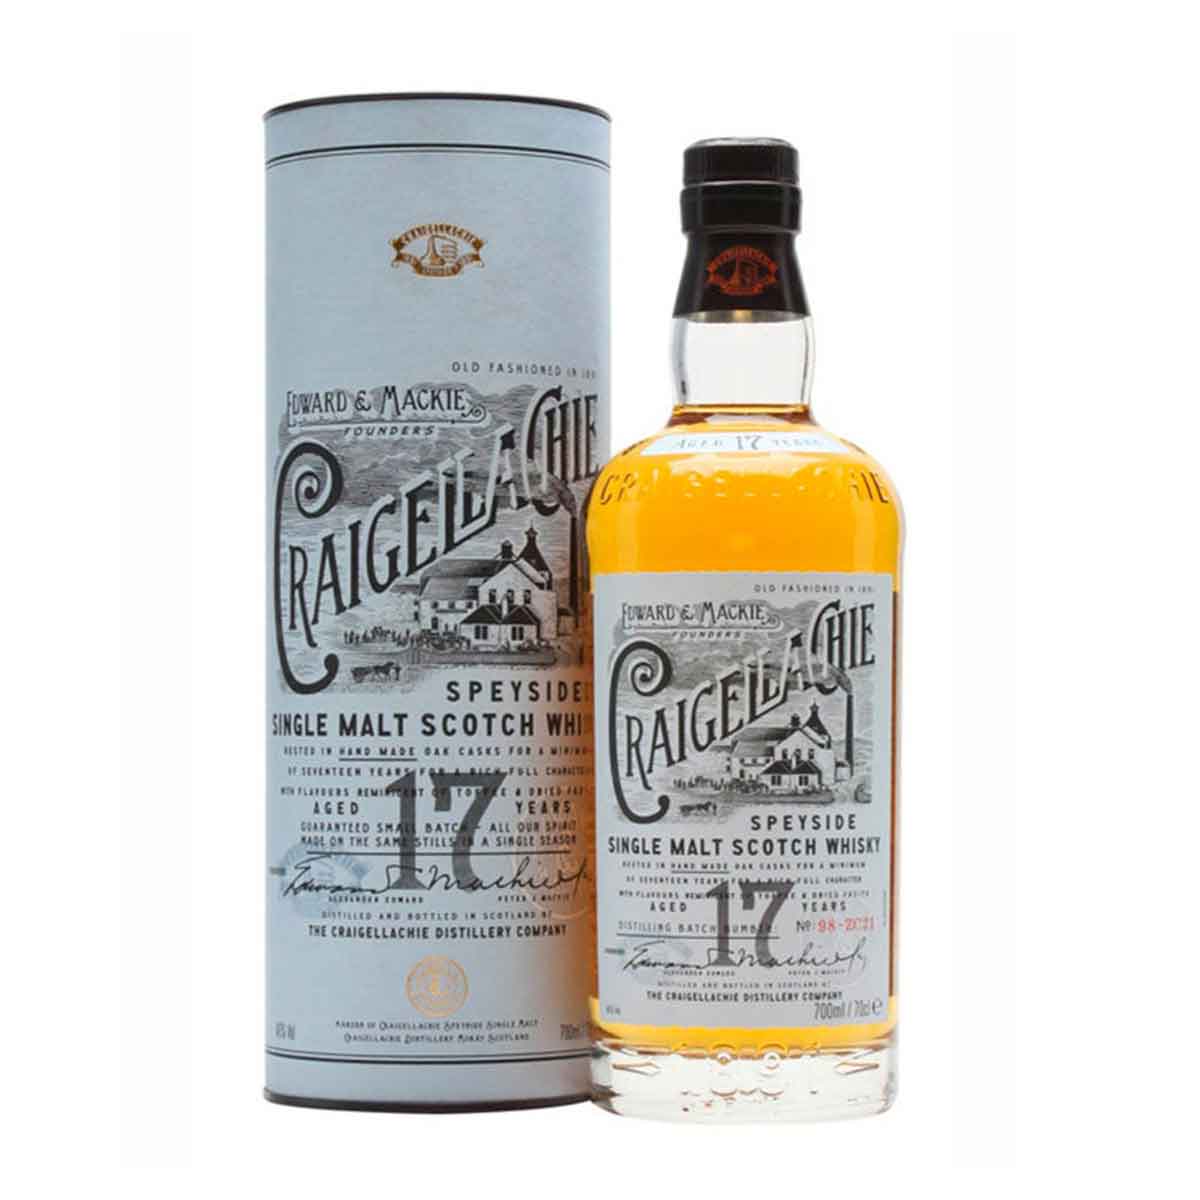 TAG Liquor Stores BC-CRAIGELLACHIE 17 YEAR OLD SCOTCH WHISKY 750ML